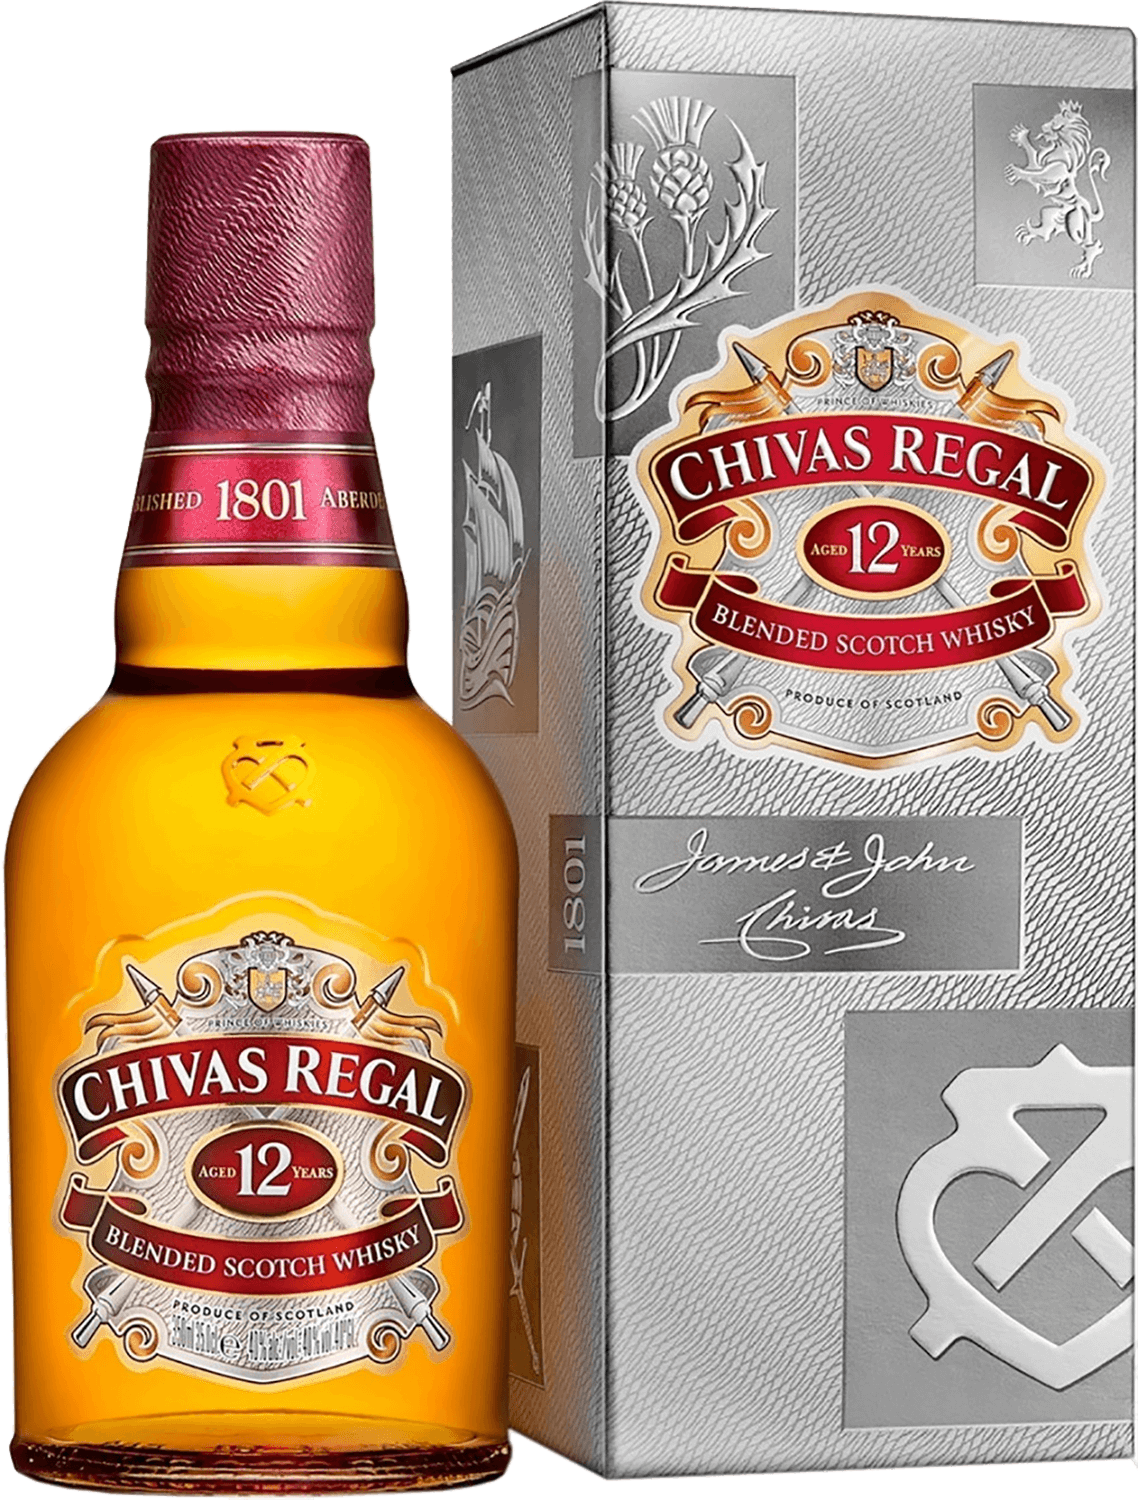 Chivas Regal Blended Scotch Whisky 12 y.o. (gift box) chivas regal extra oloroso sherry cask blended scotch whisky gift box